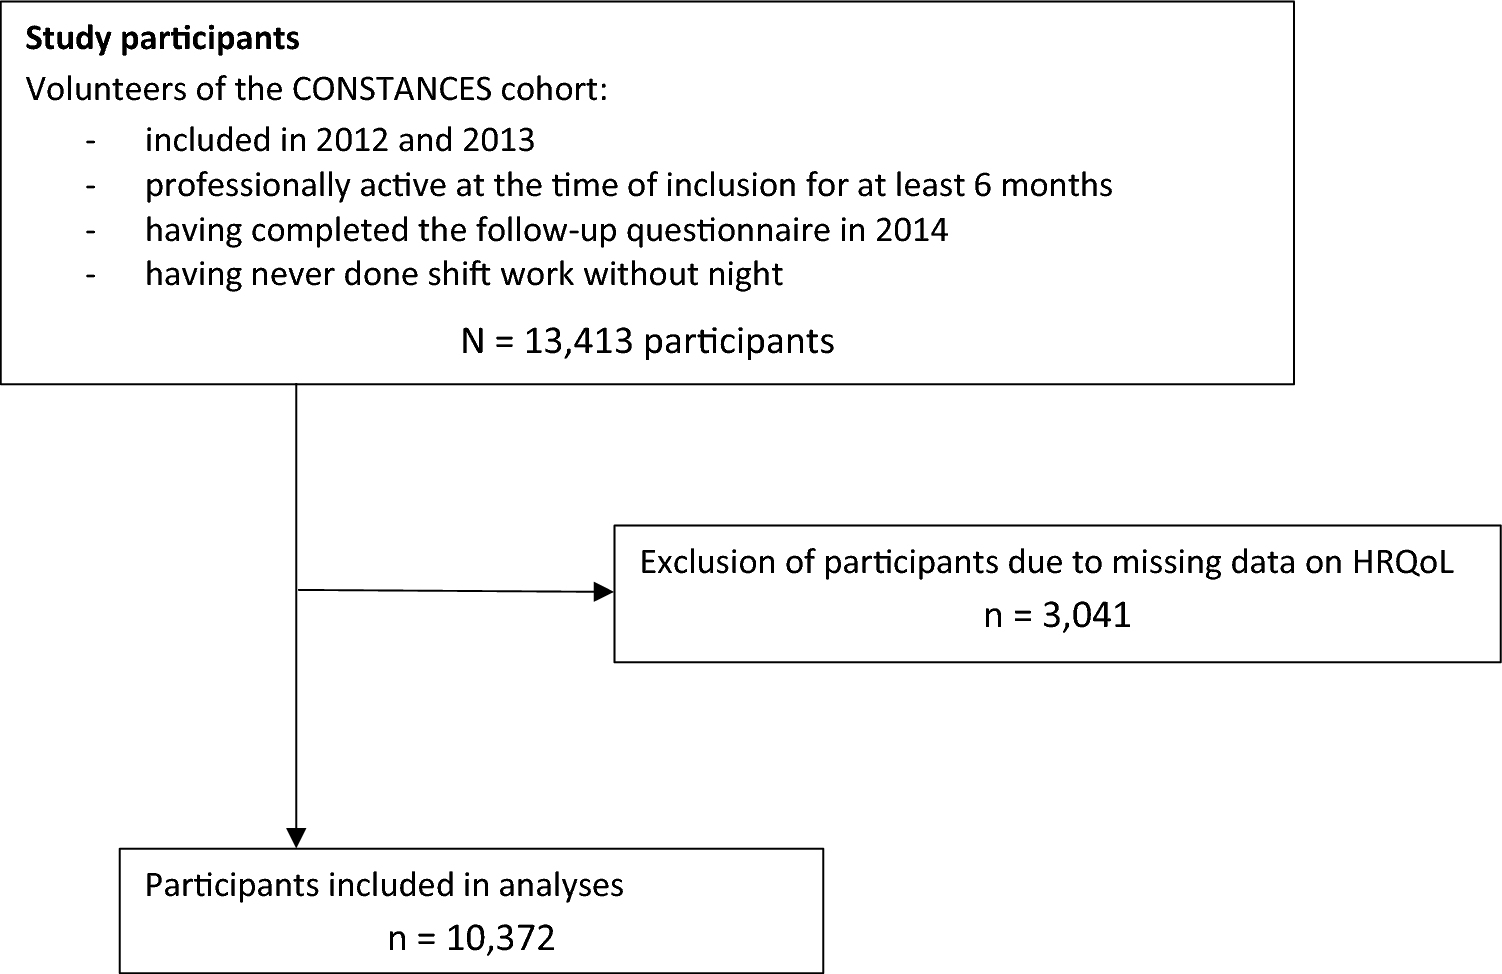 Relationship between night work and health-related quality of life: an analysis based on profiles and cumulative duration of exposure to night work among French workers in the CONSTANCES cohort